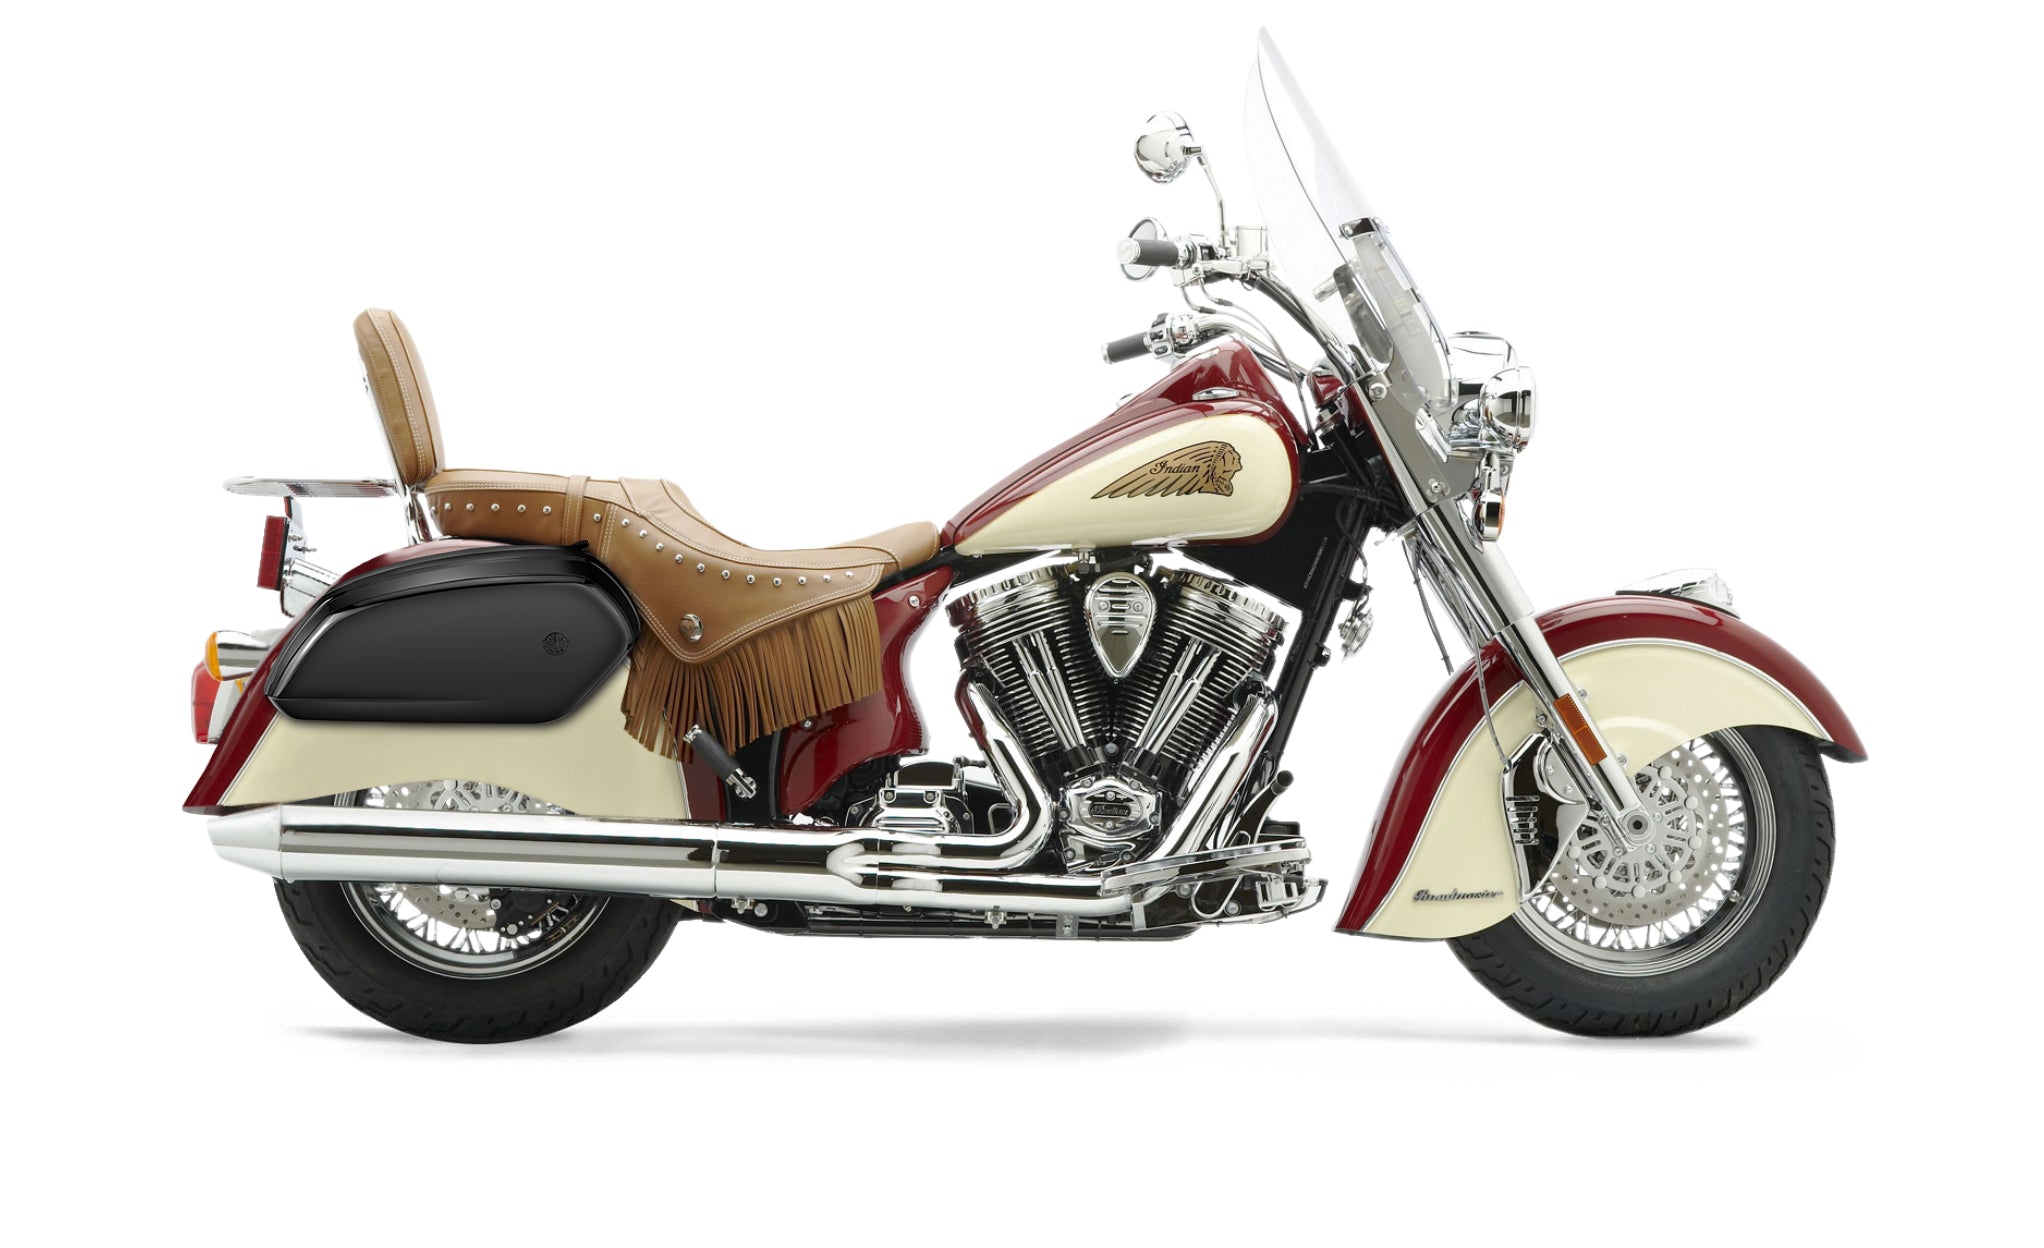 Viking Viper Large Indian Chief Roadmaster Painted Motorcycle Hard Saddlebags Engineering Excellence with Bag on Bike @expand